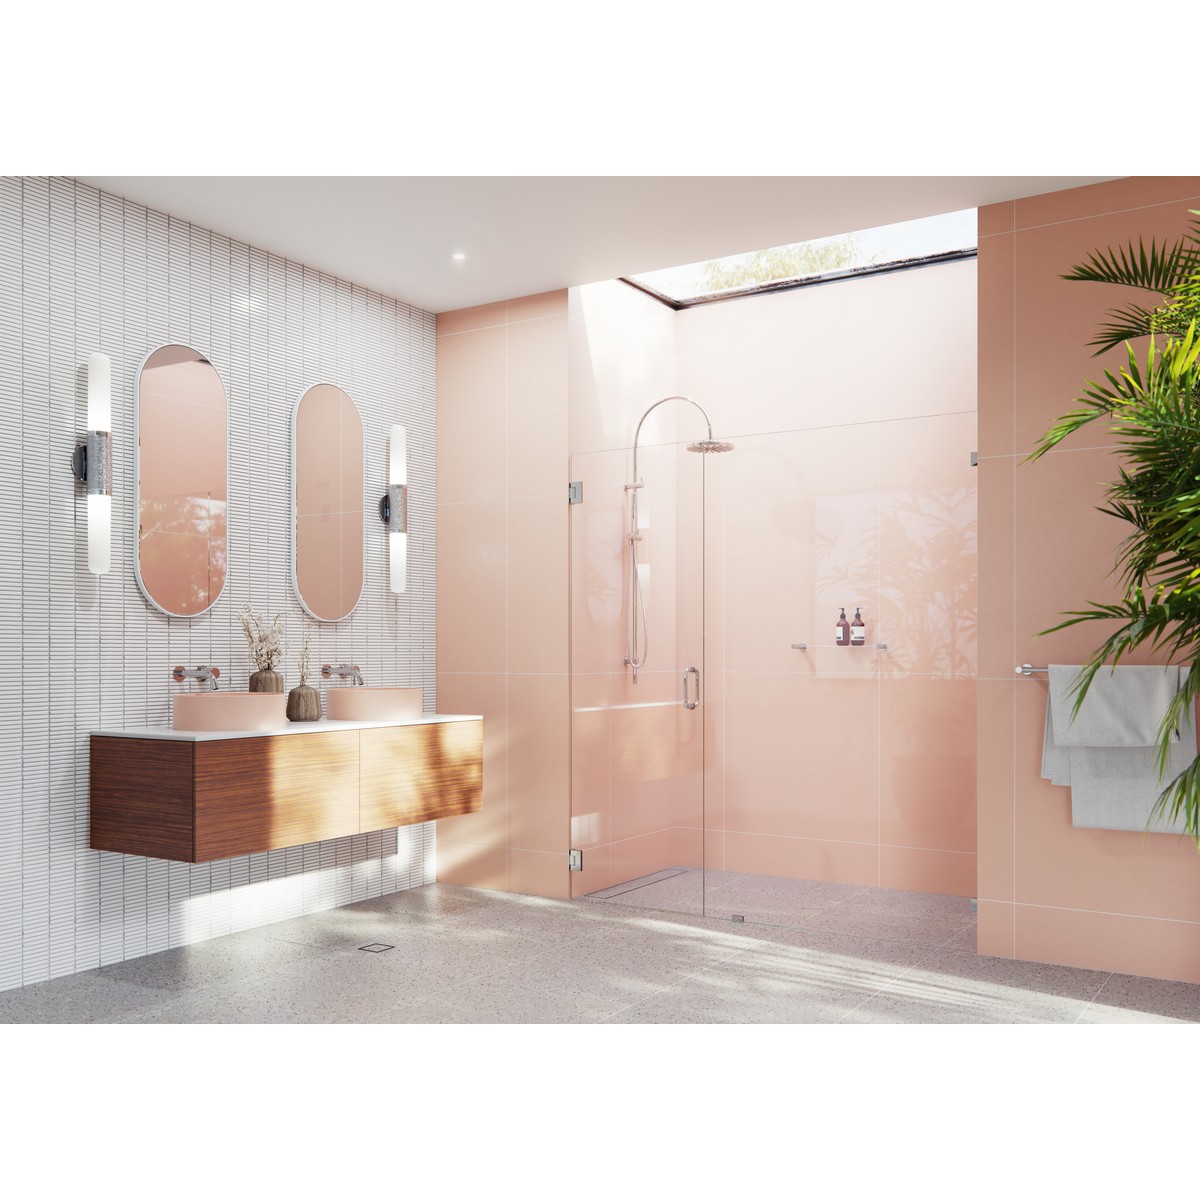 GLASS WAREHOUSE GW-WH-69.75 ILLUME 69 3/4 W X 78 H WALL HINGED FULLY FRAMELESS GLASS SHOWER ENCLOSURE